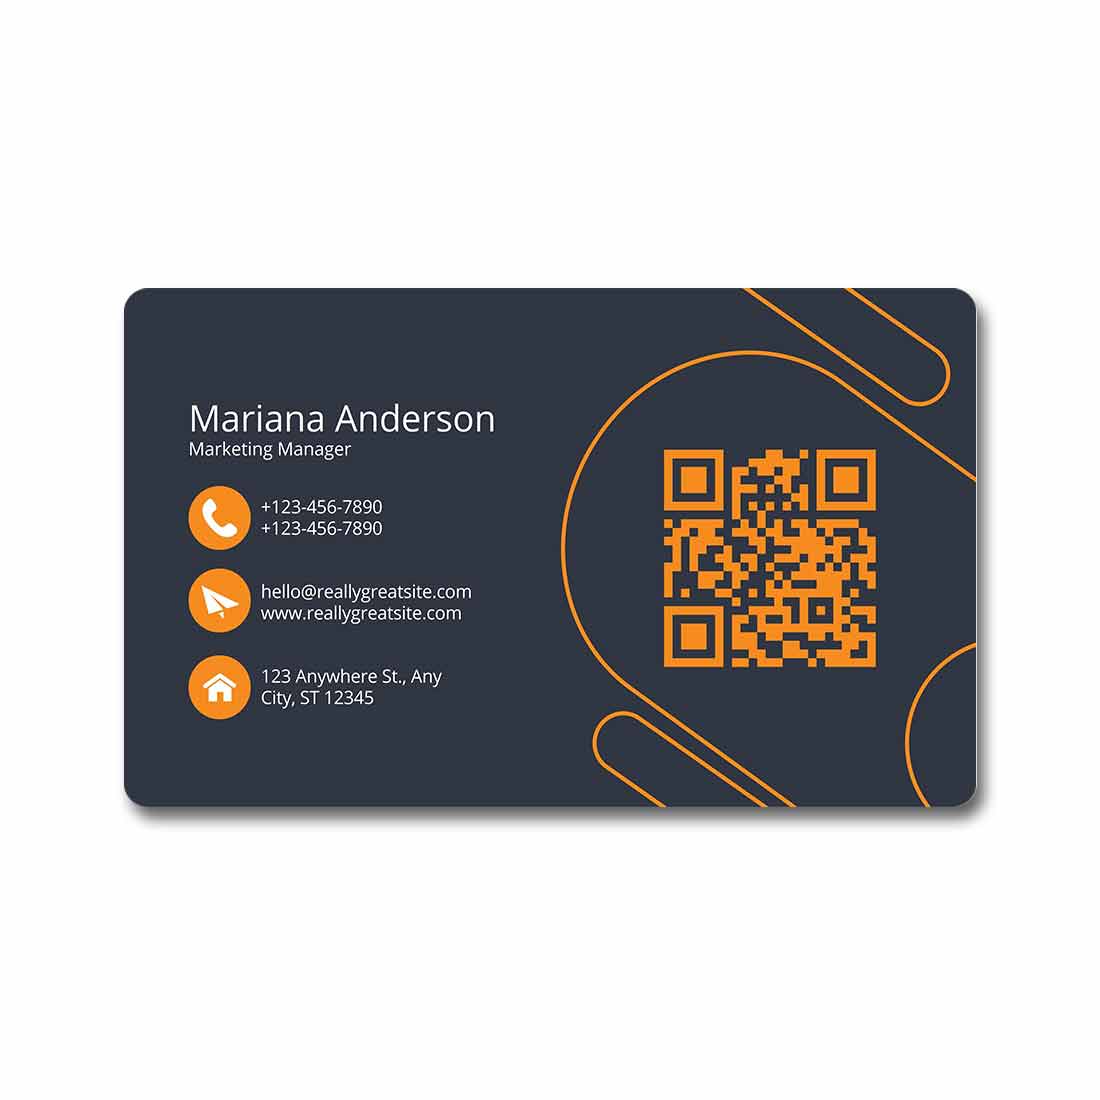 digital business card with qr code